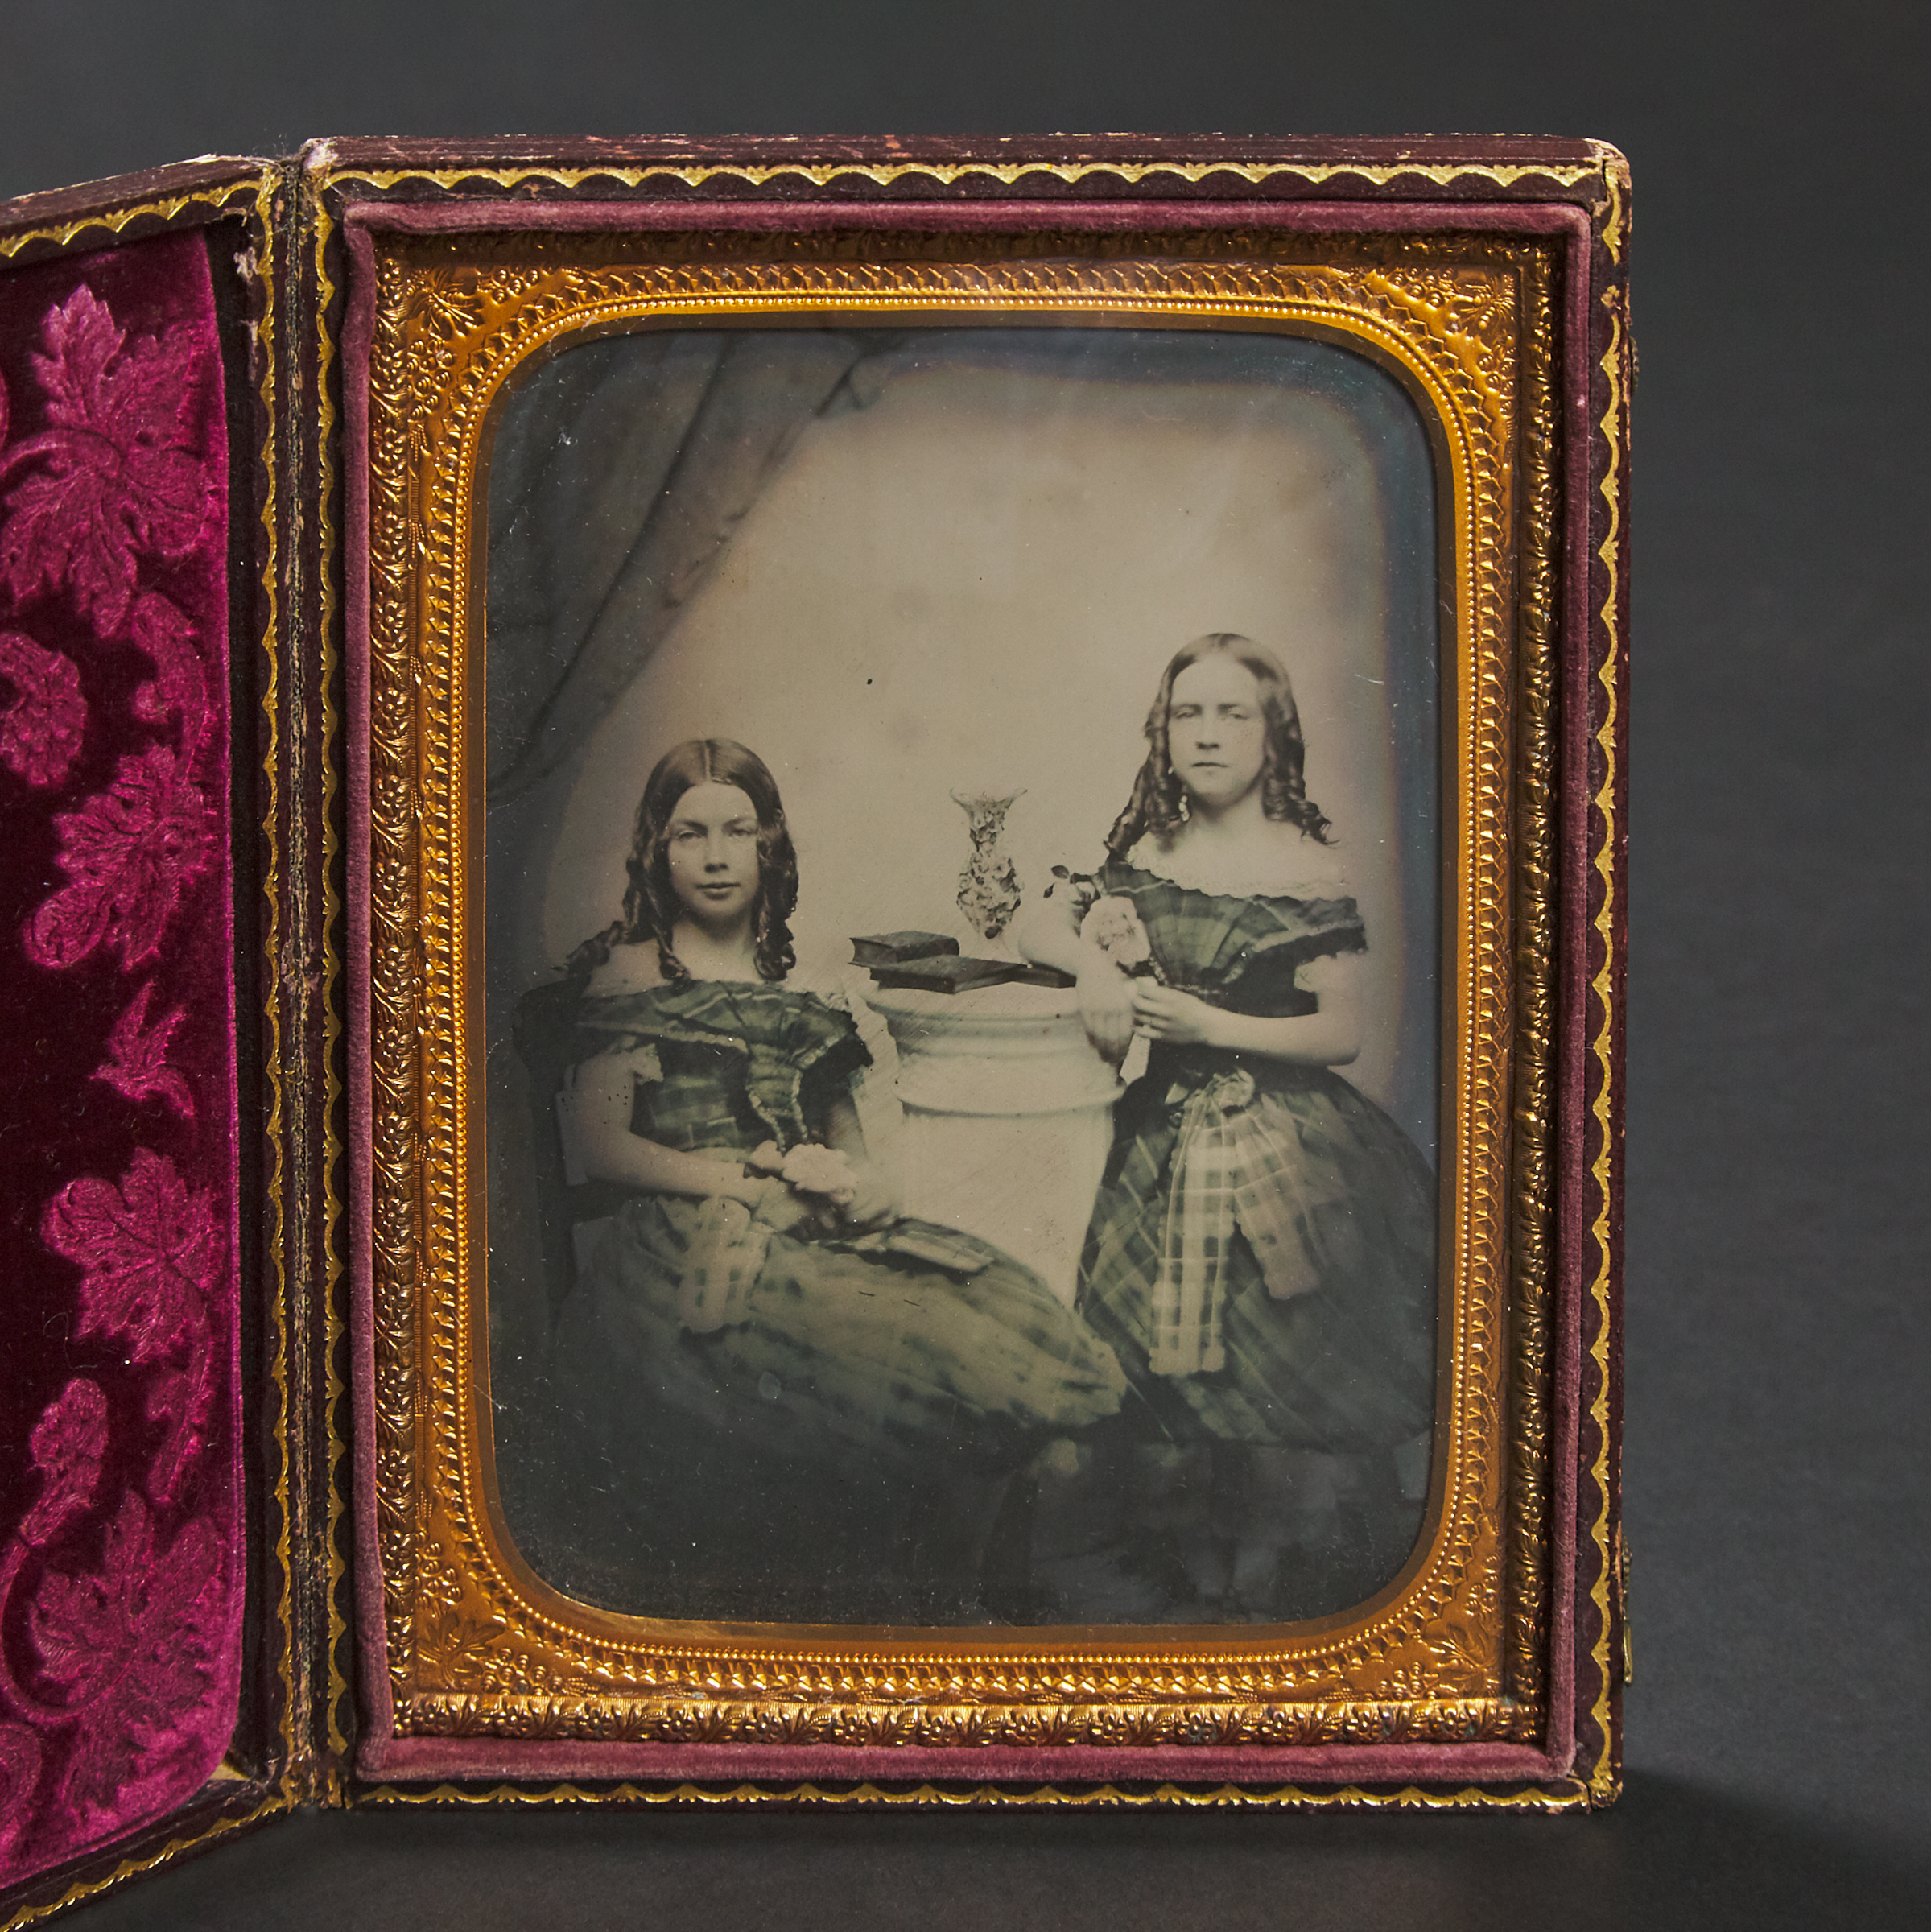 Photographic Portrait of Two Young Girls, c.1860